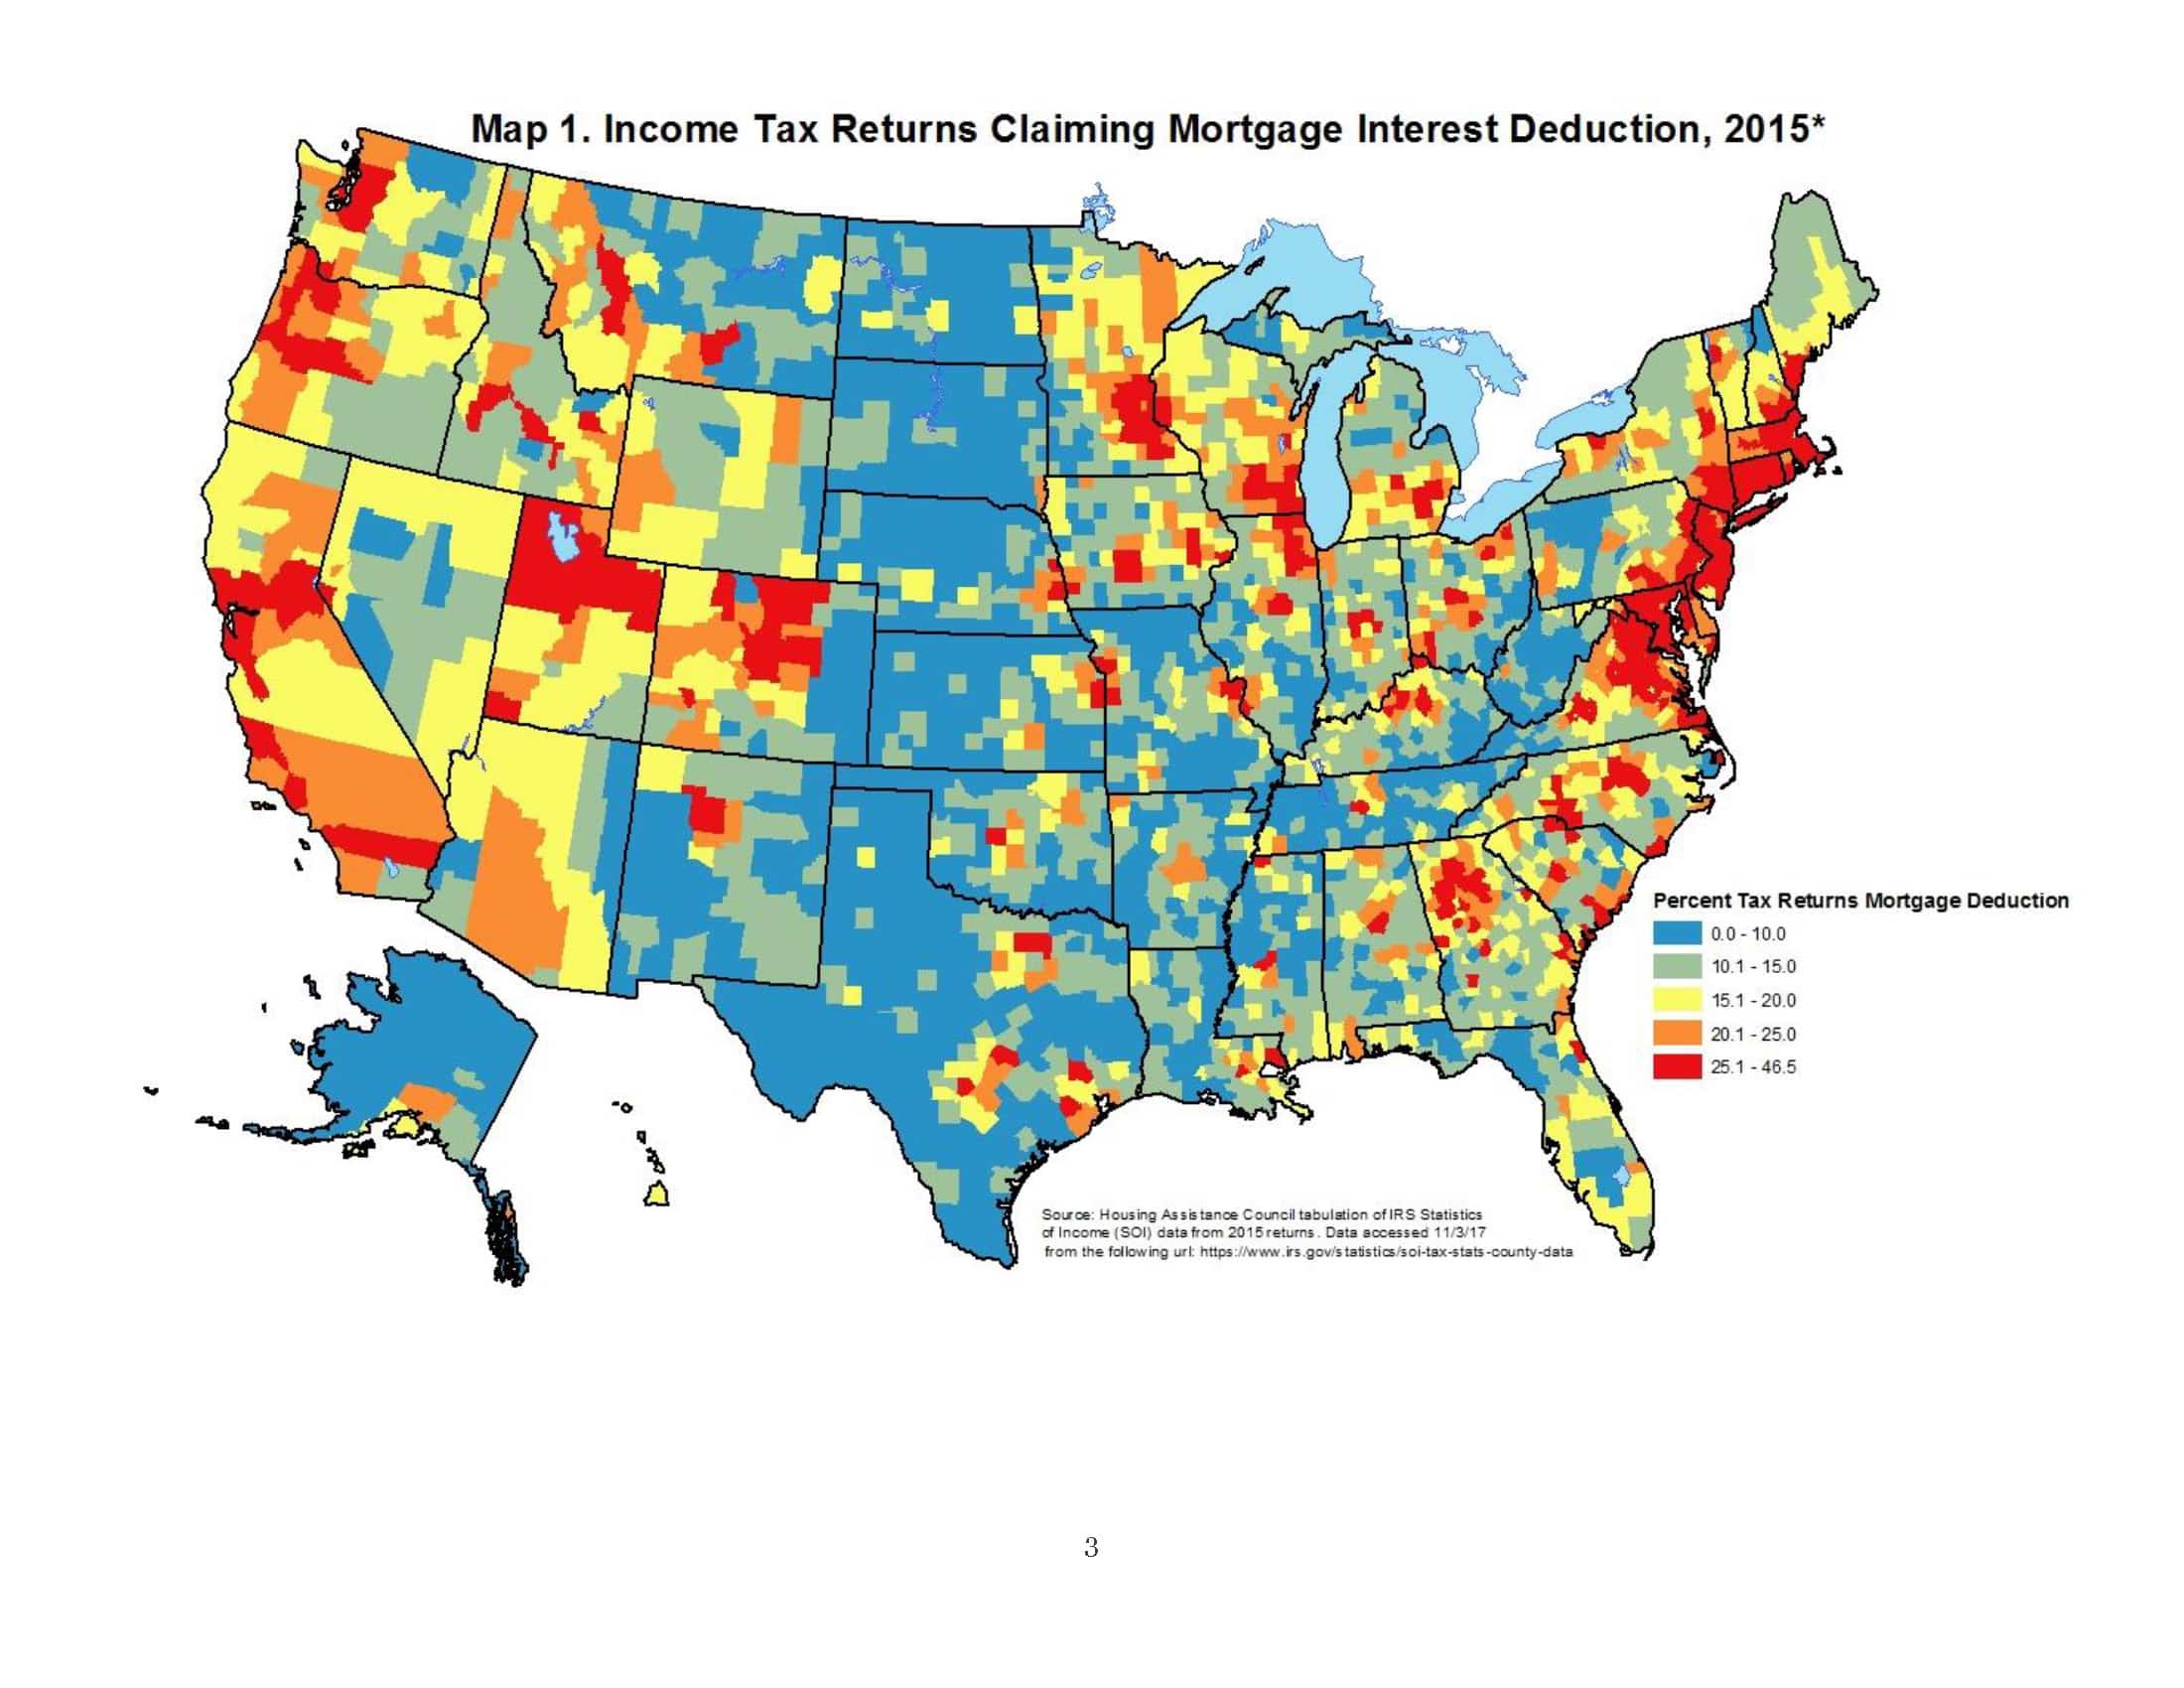 Income Tax Returns Claiming Mortgage Interest Deduction, 2015